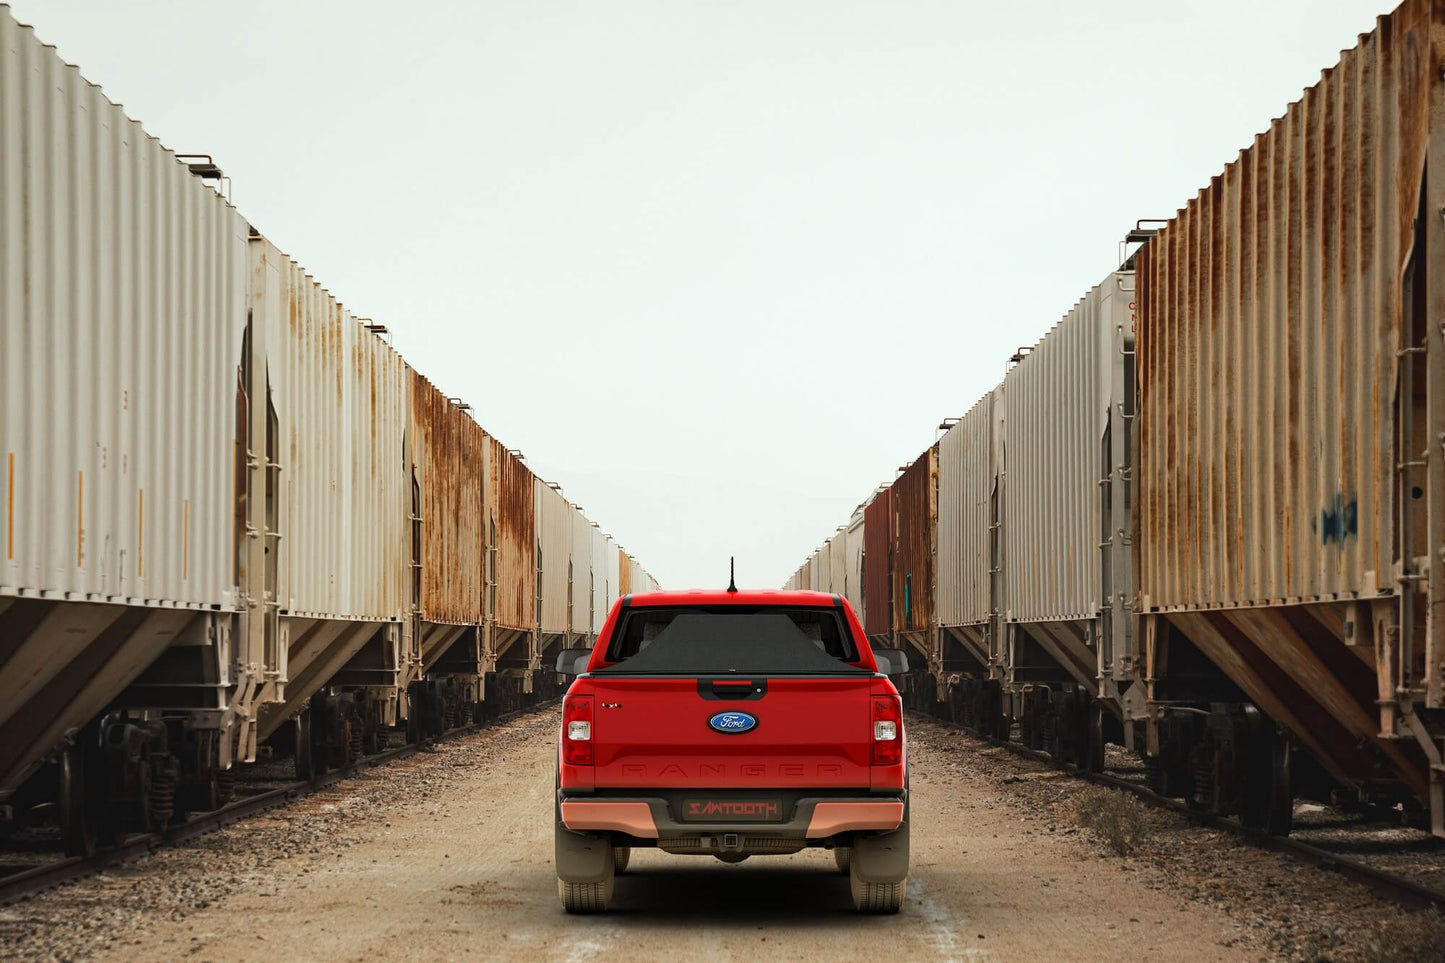 Red Ford Ranger with Sawtooth Stretch tonneau expanded between train cars